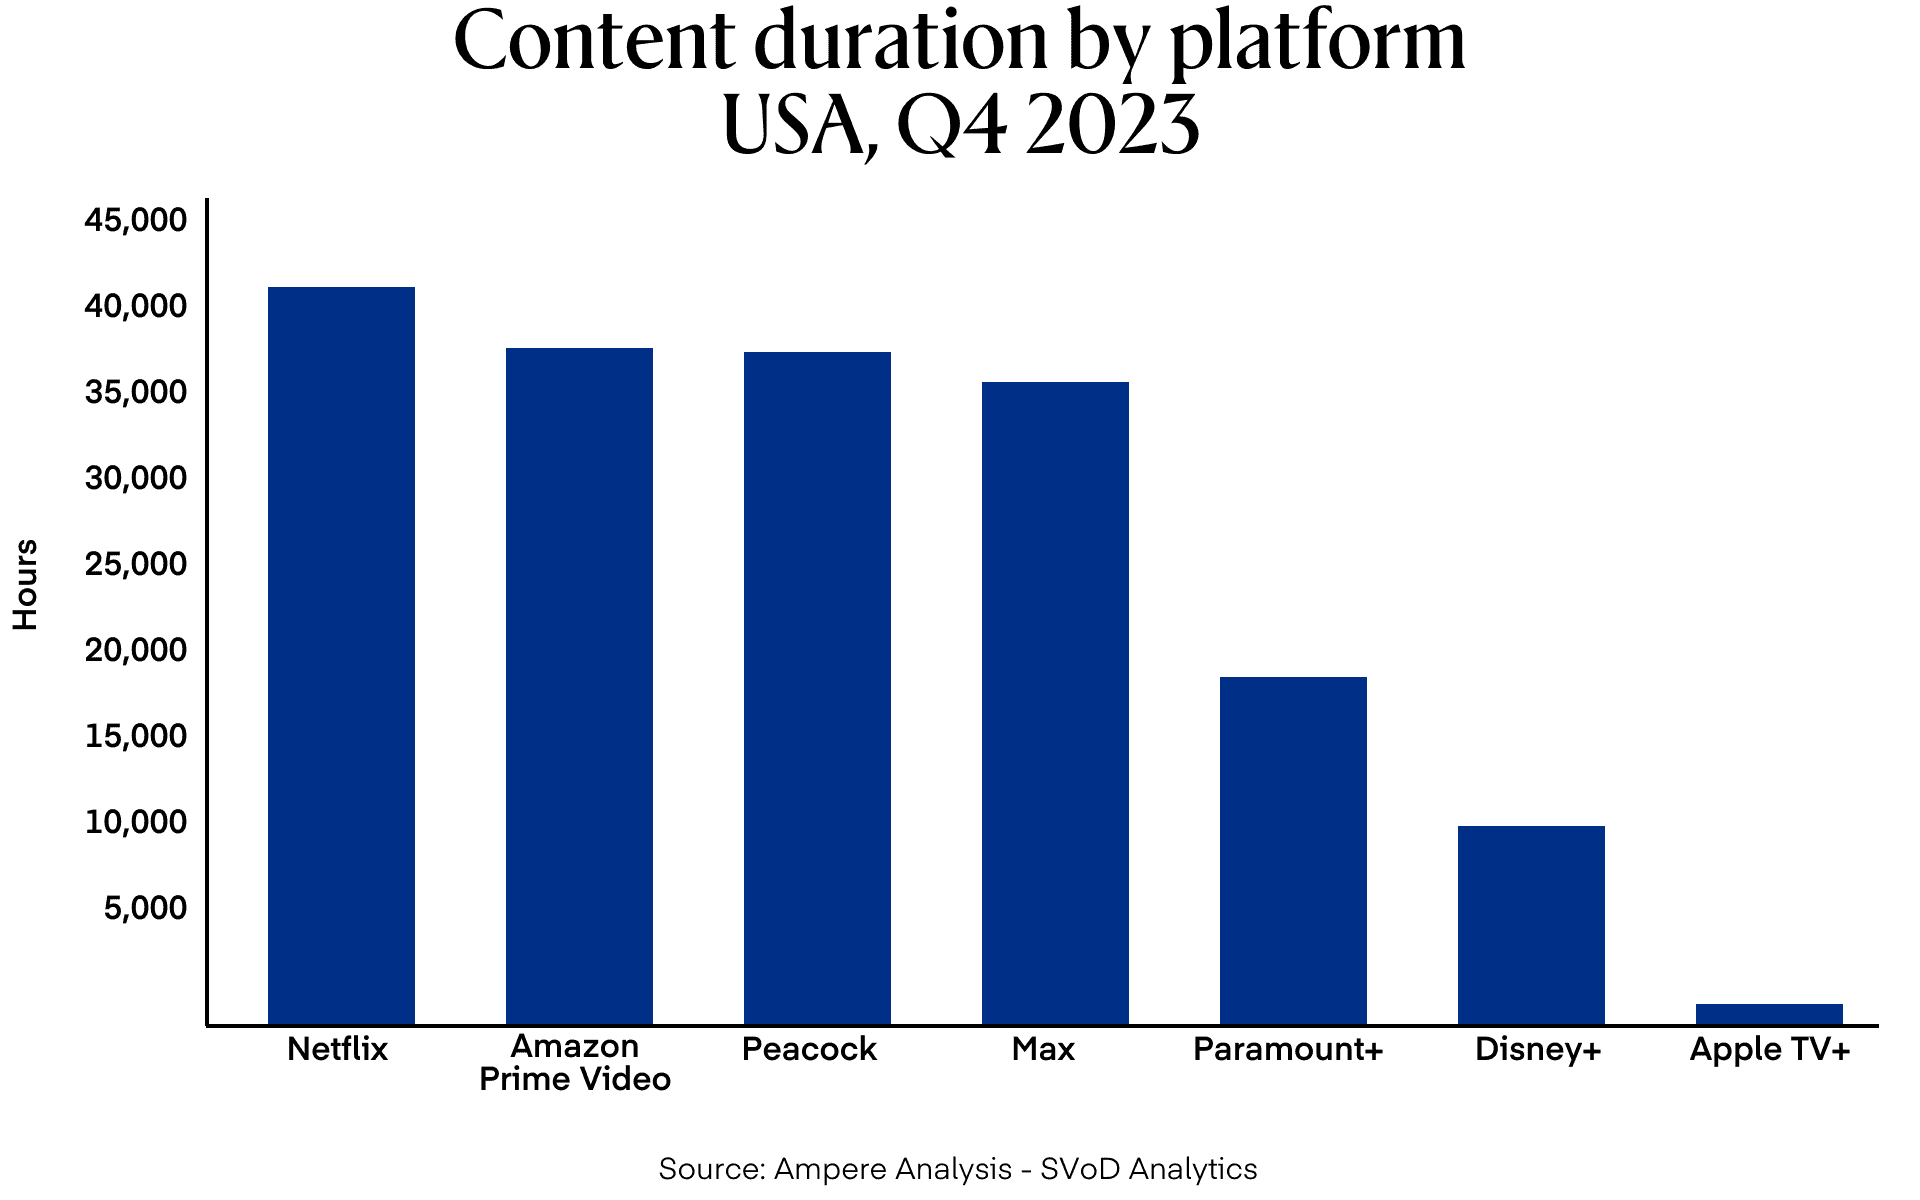 Content duration by platform graph showing USA data from Q4, 2023.